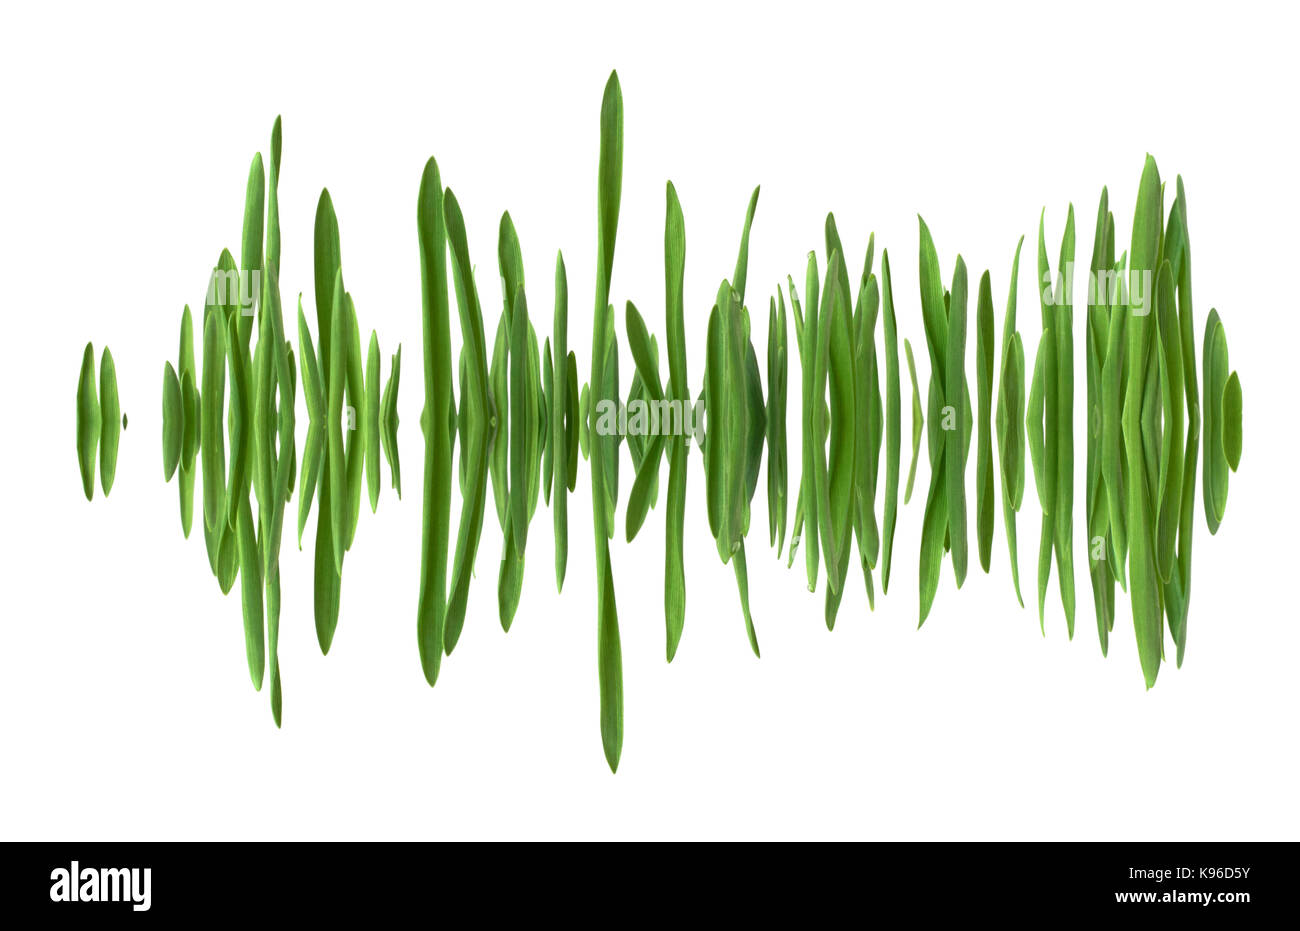 Blades of grass in a row, mirrored as if in water, creating the appearance of a soundwave. Isolated on white background. Stock Photo